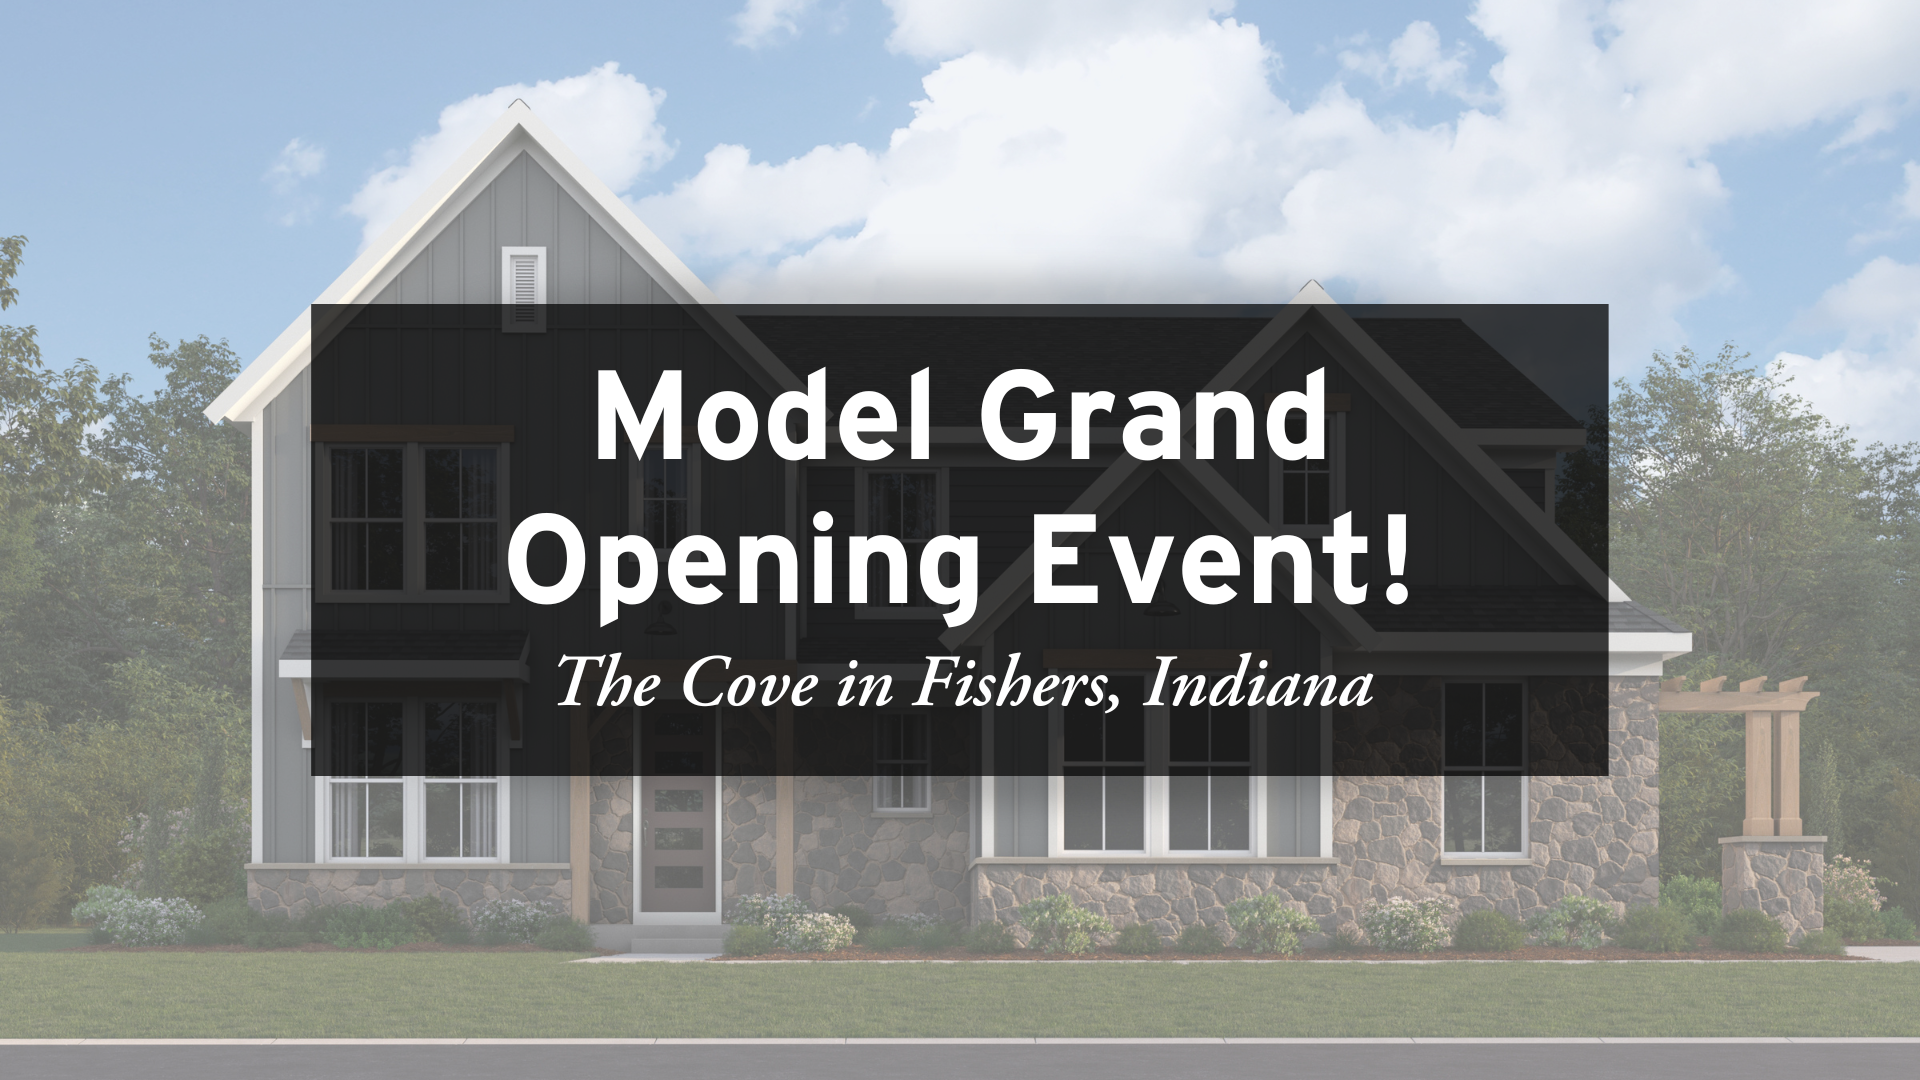 Model Grand Opening Event in Fishers, IN!